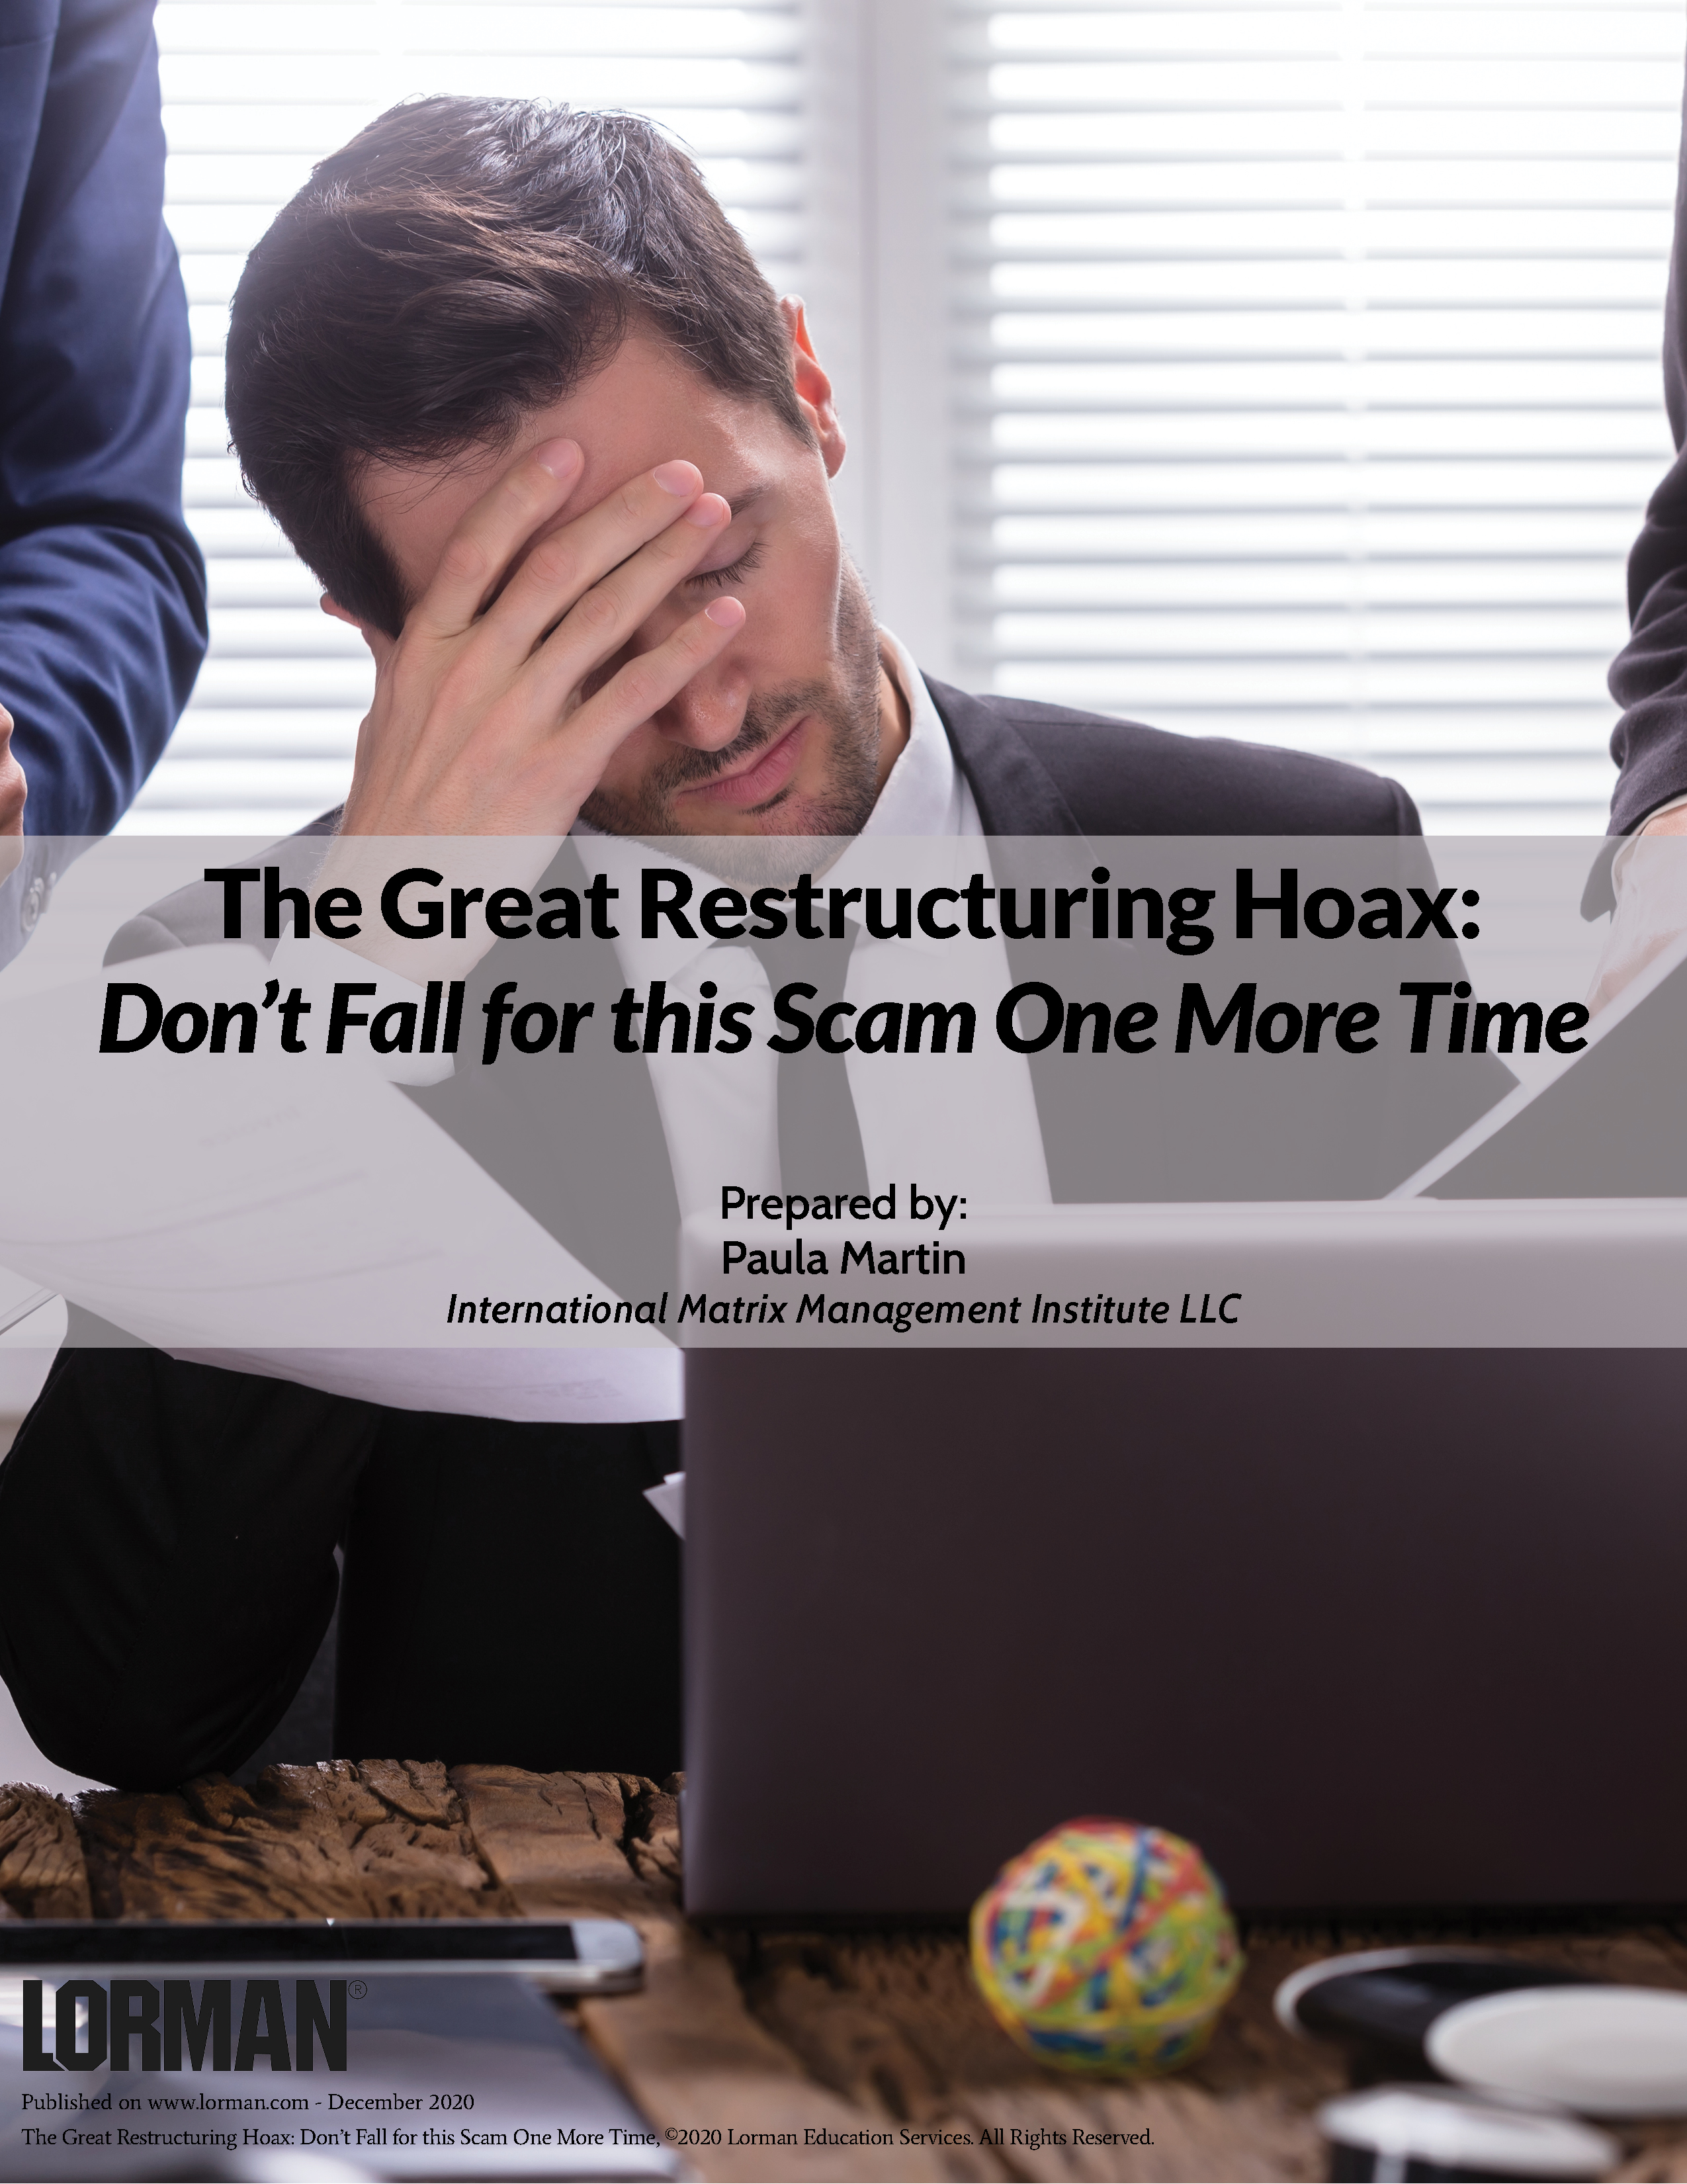 The Great Restructuring Hoax